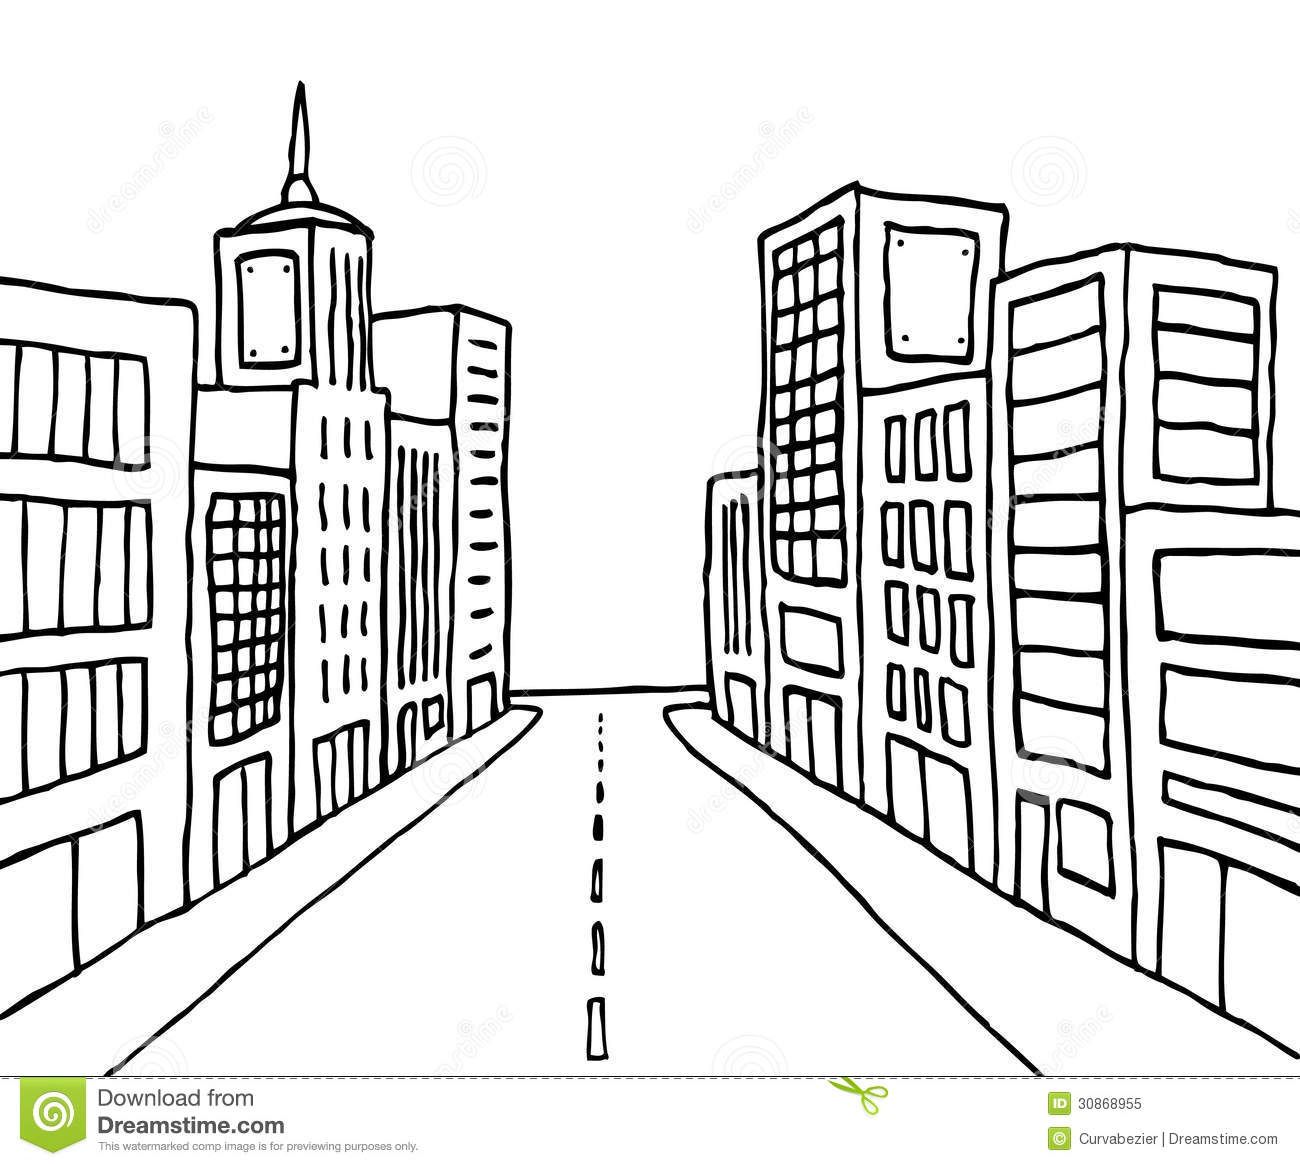 Cityscape clipart coloring page. Skyscraper sheets yahoo image